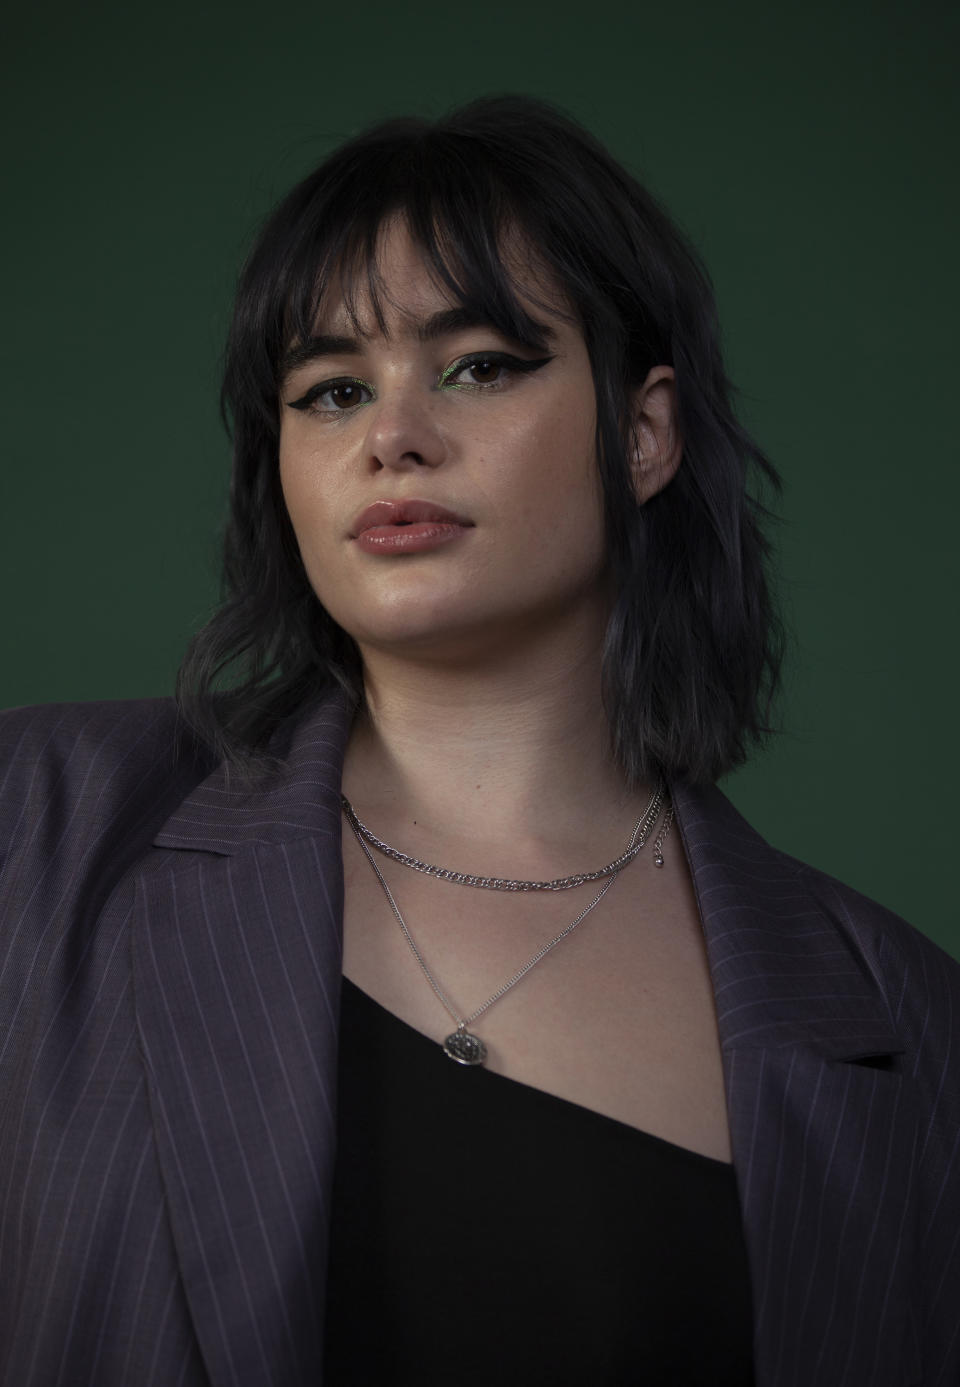 In this Dec. 9, 2019, photo Barbie Ferreira poses for a portrait in Los Angeles. Ferreira was named one of The Associated Press’ Breakthrough Entertainers of 2019. (Photo by Rebecca Cabage/Invision/AP)